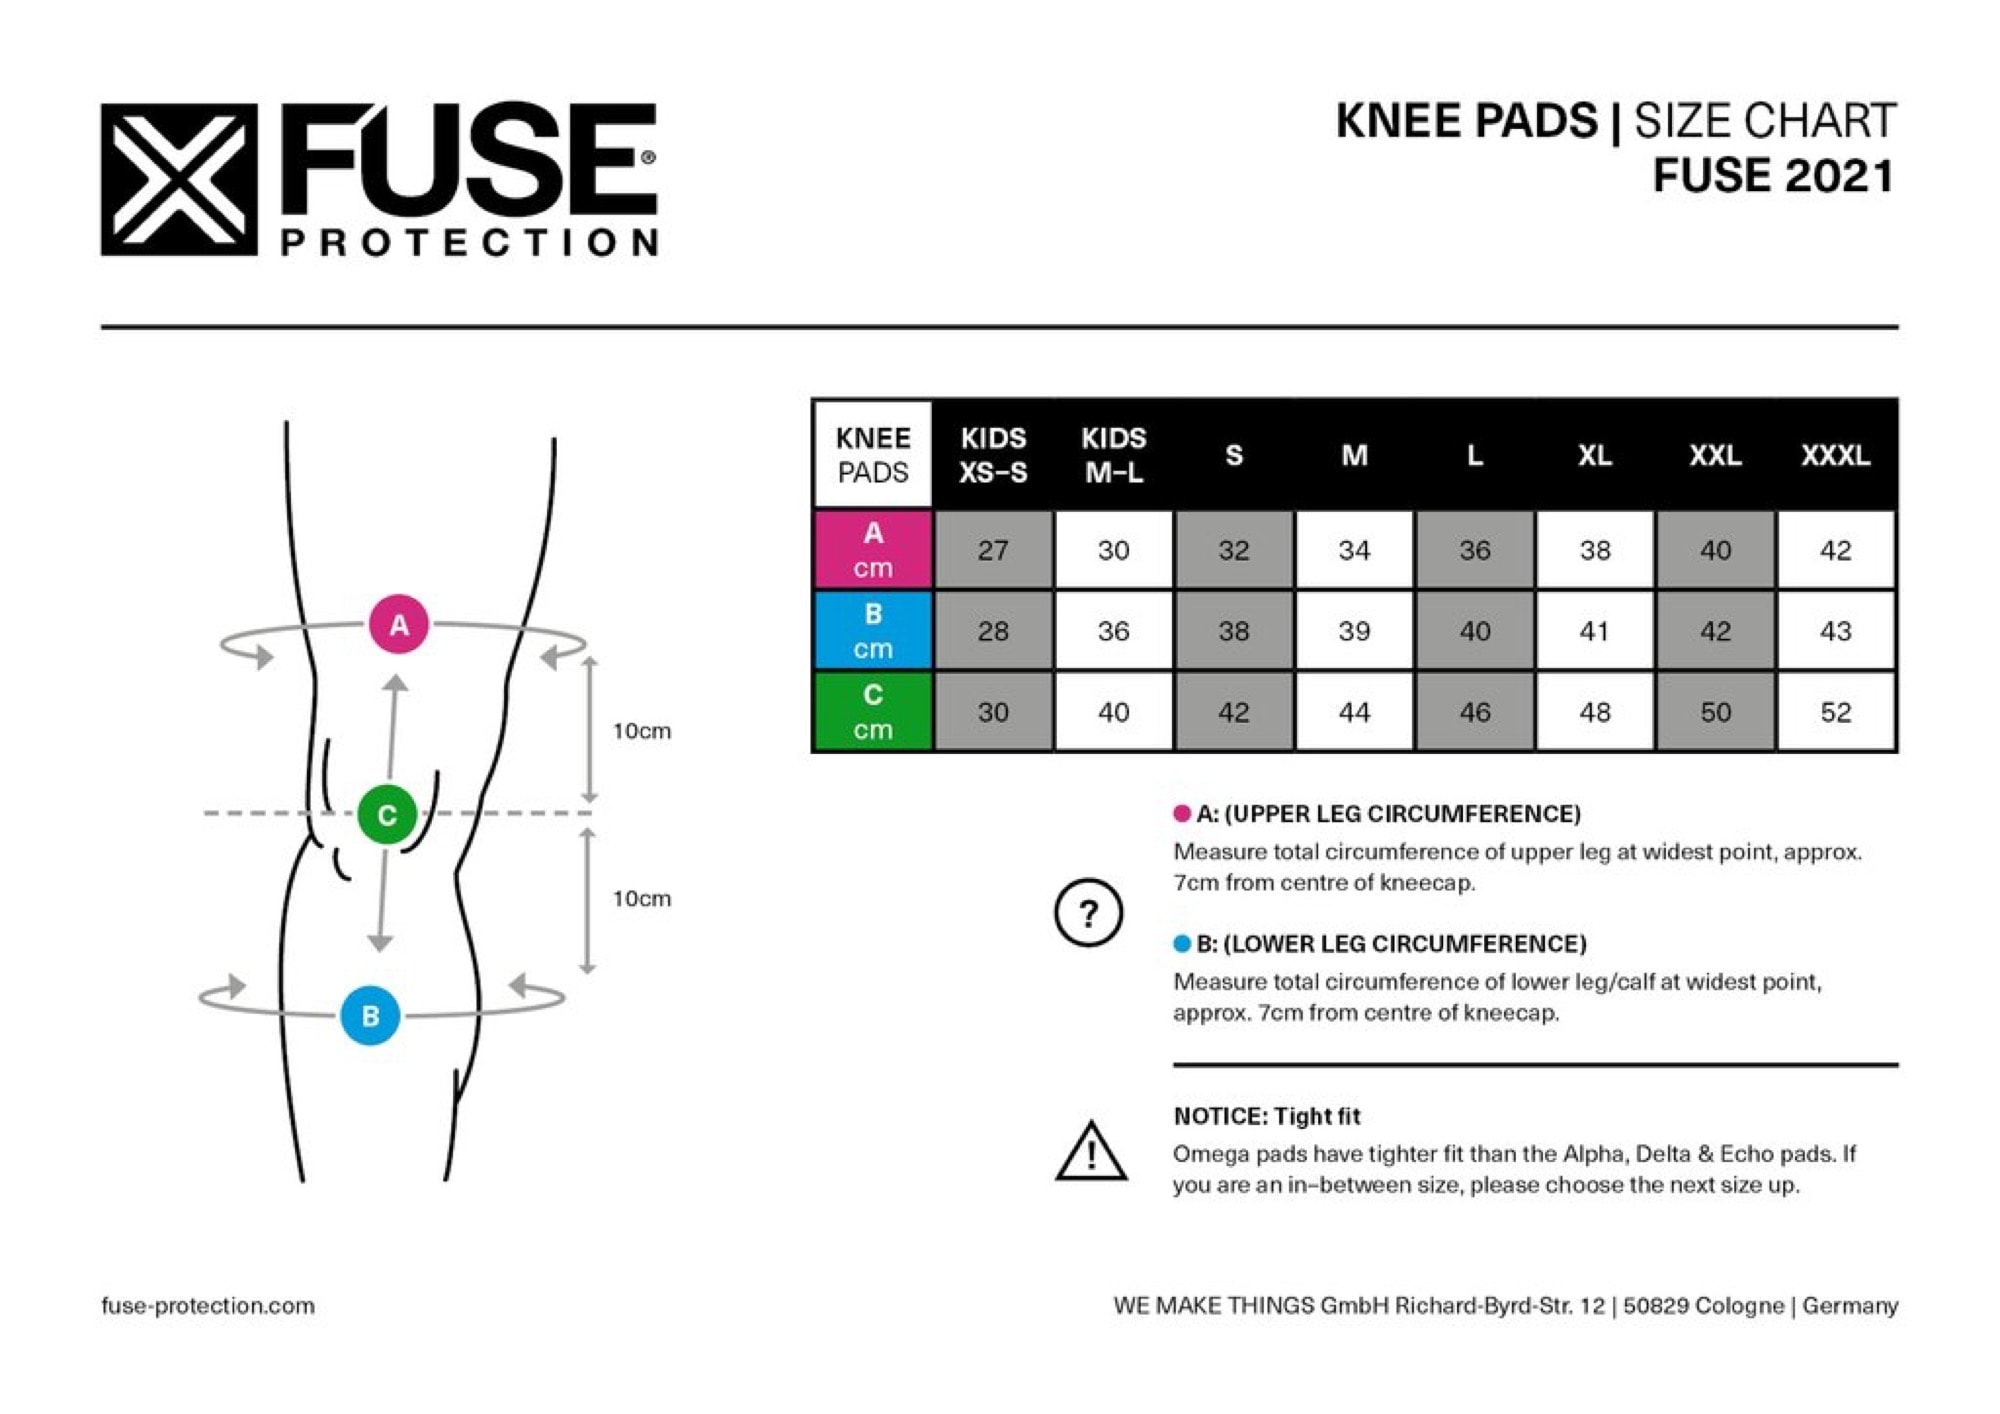 FUSE Protection Size Chart Knee Pads